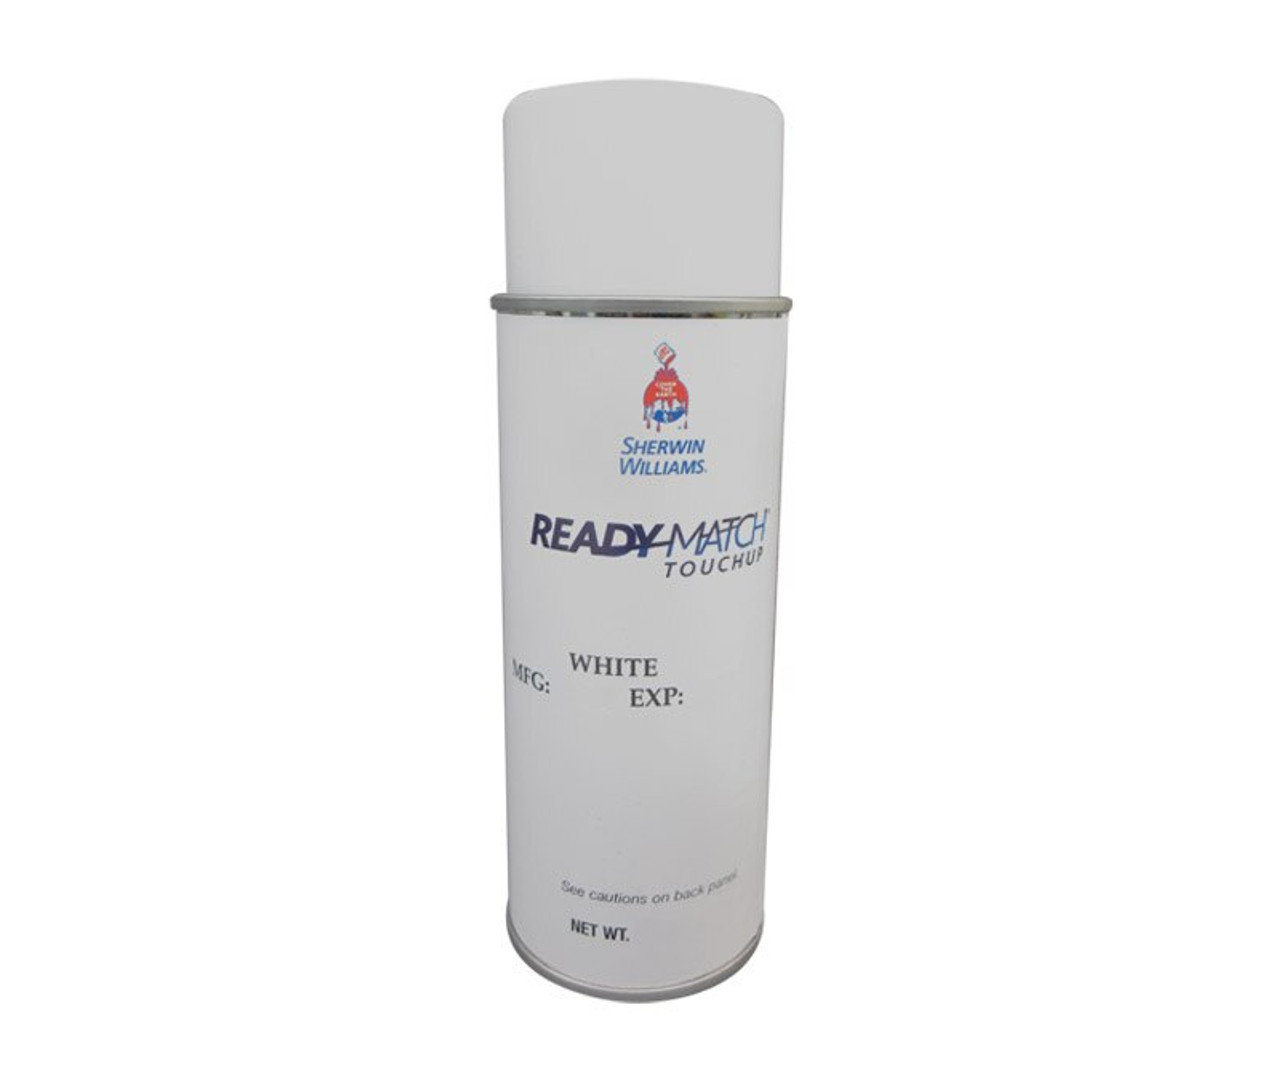 RAL Paint Standard Touch Up 12oz Aerosol Spray Paint